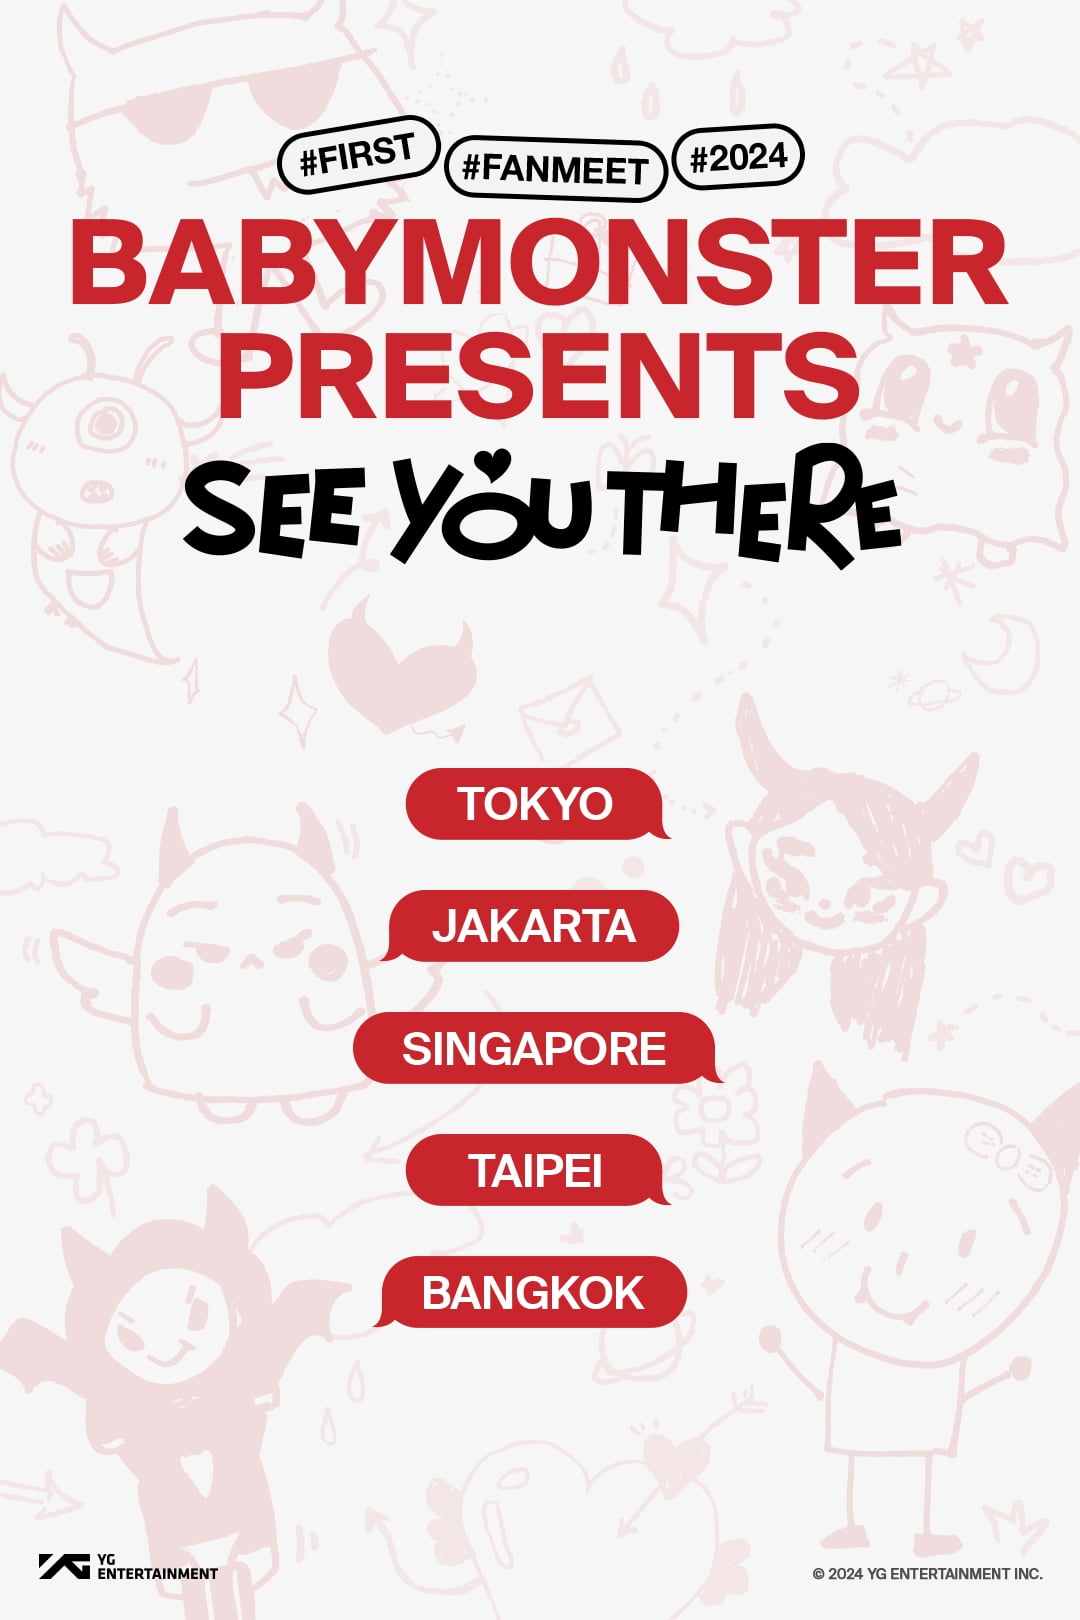 YG Baby Monster, first fan meeting tour even before official debut